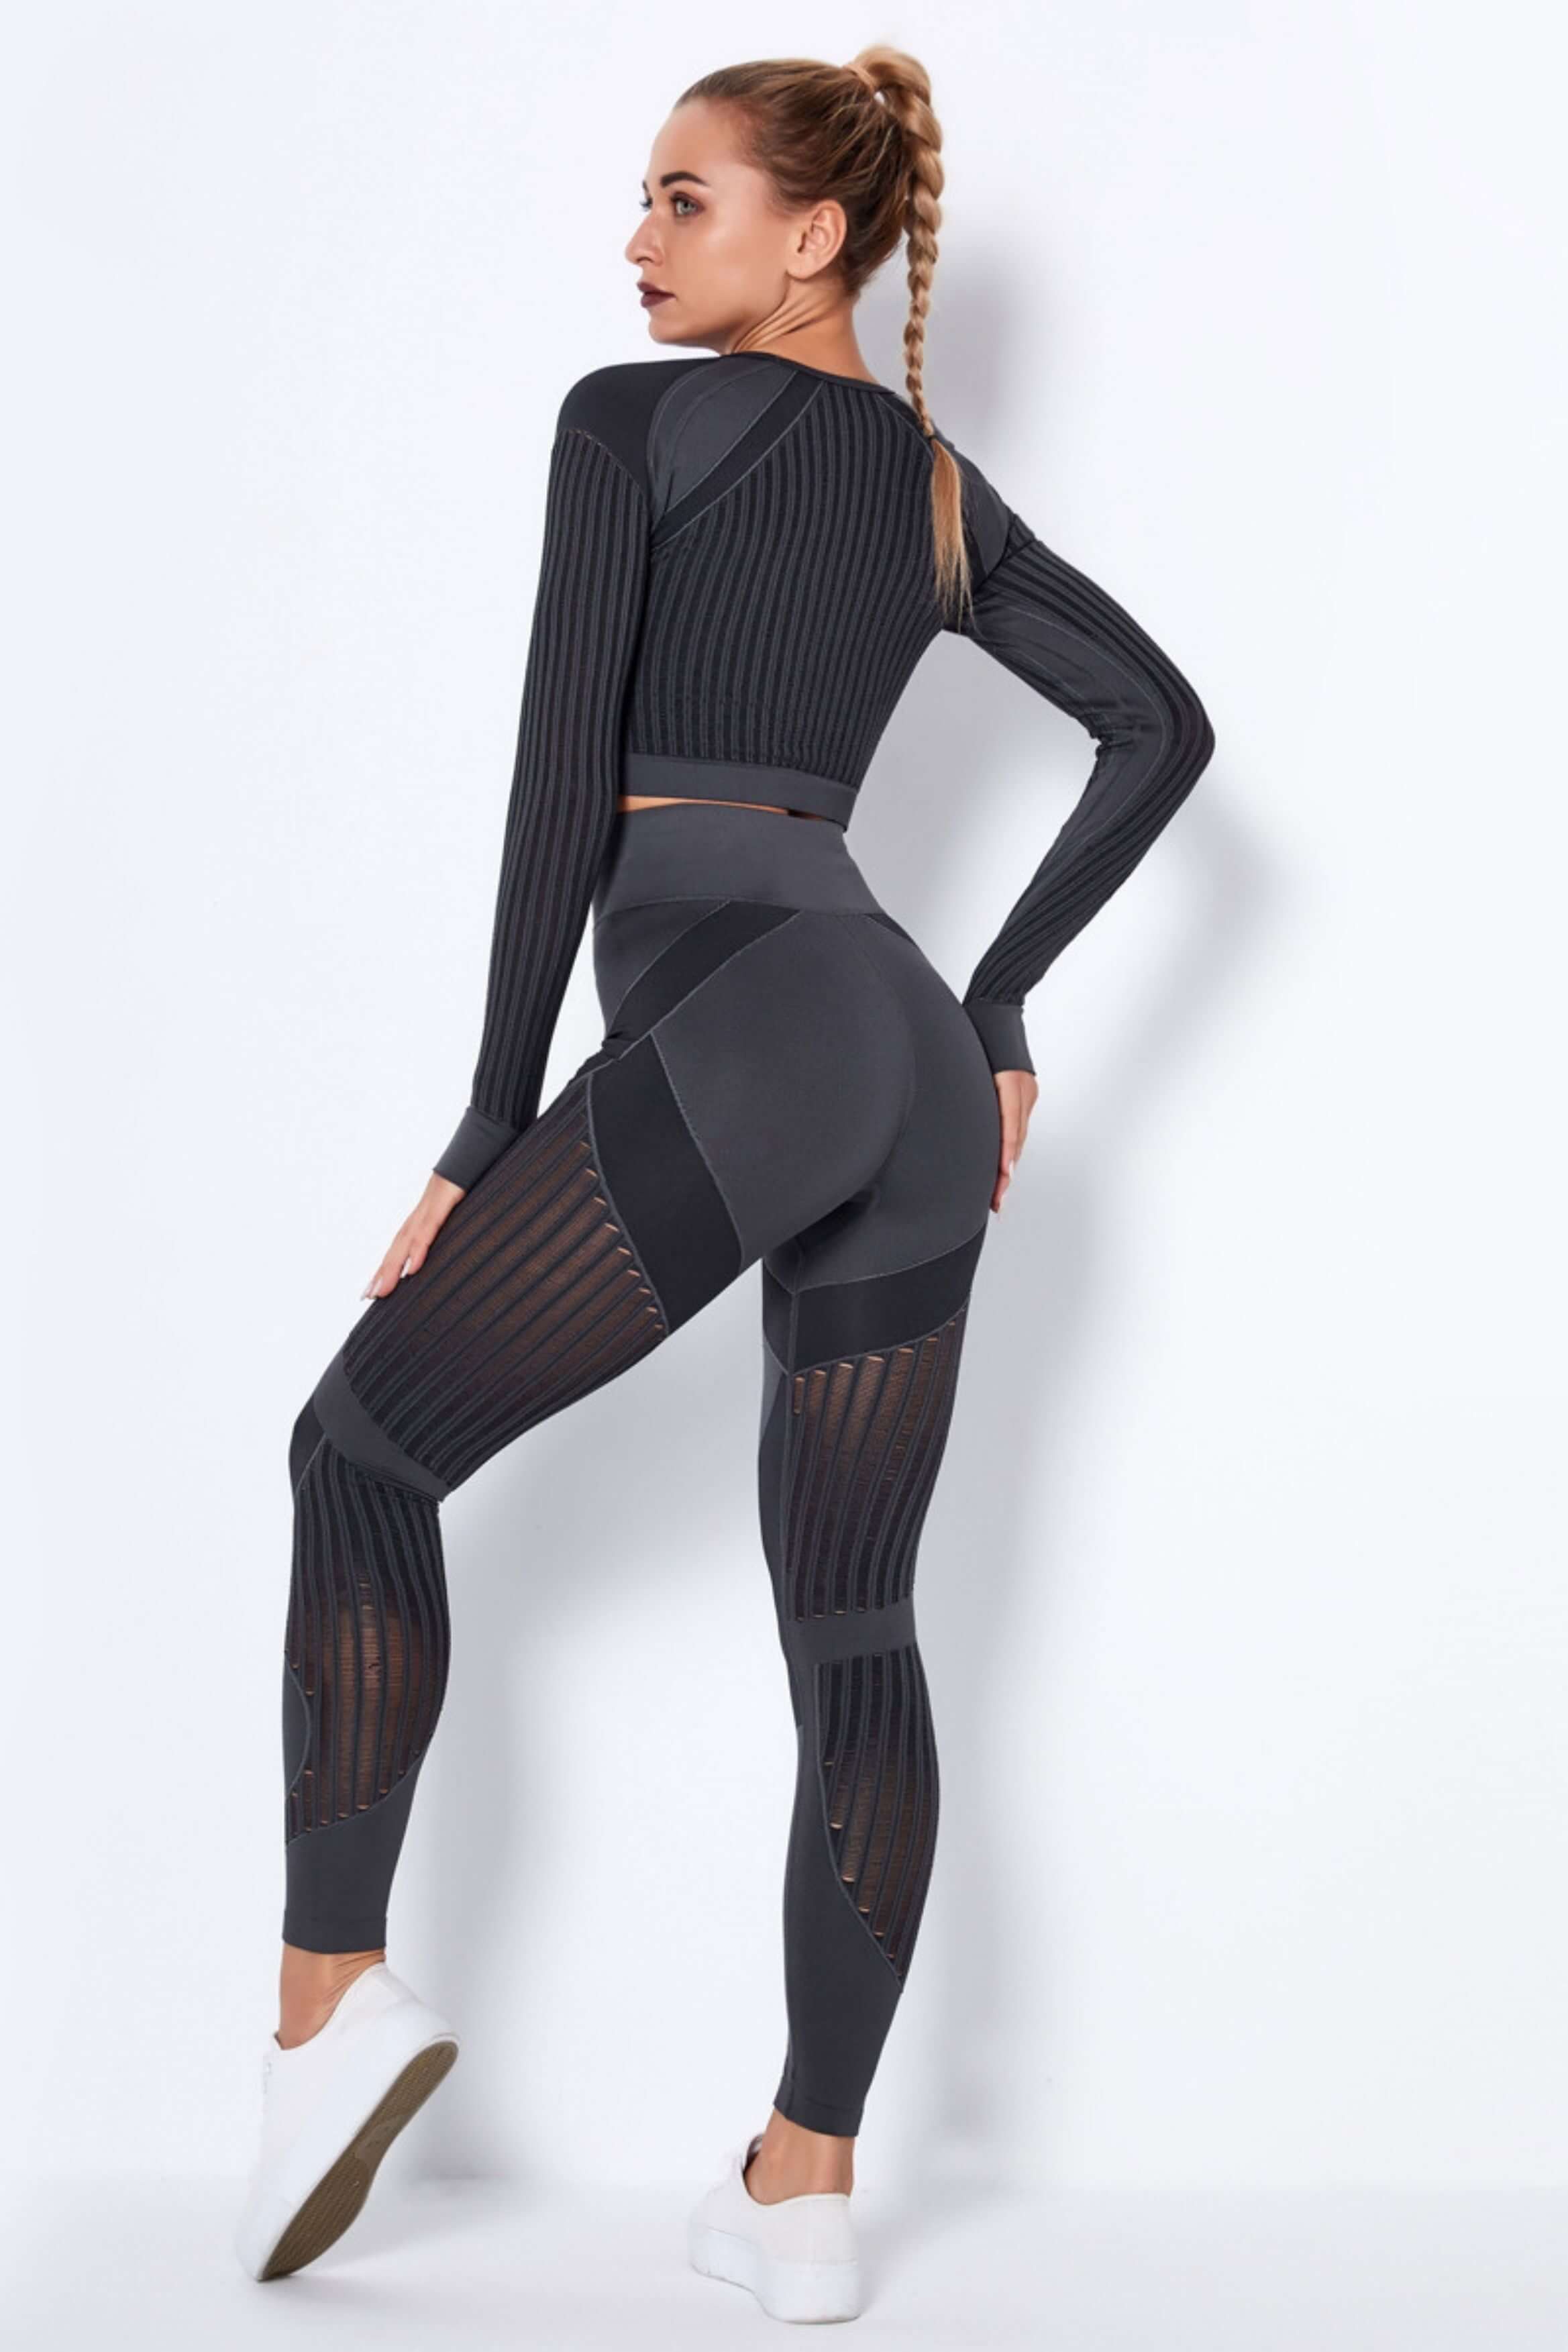 Yogadept hollow out Mesh Workout Set Two Piece